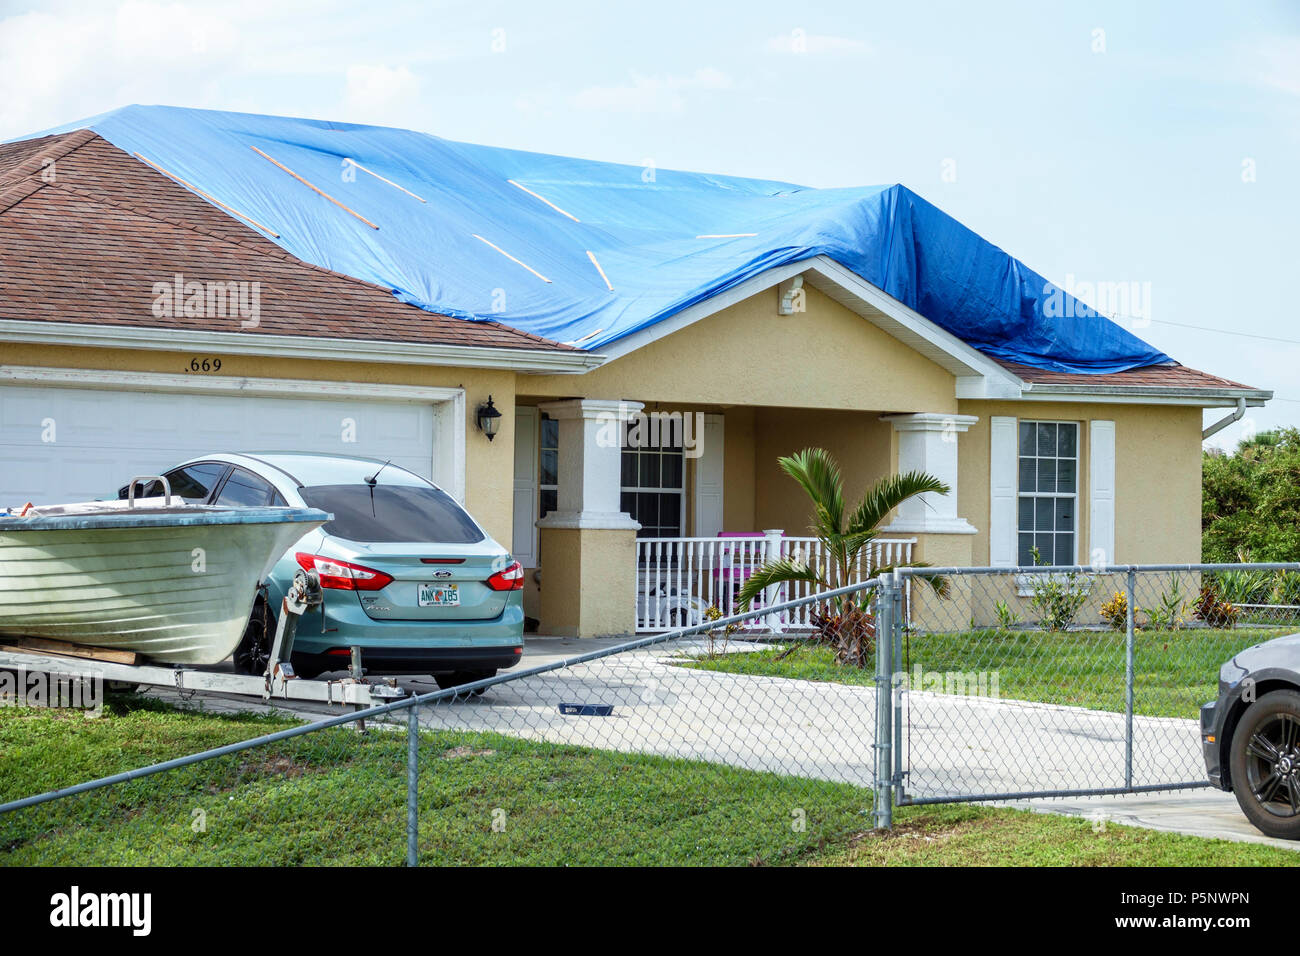 Fort Ft. Myers Florida,Lehigh Acres,after Hurricane Irma storm wind damage destruction aftermath,blue tarp waterproof covering roof,house home houses Stock Photo